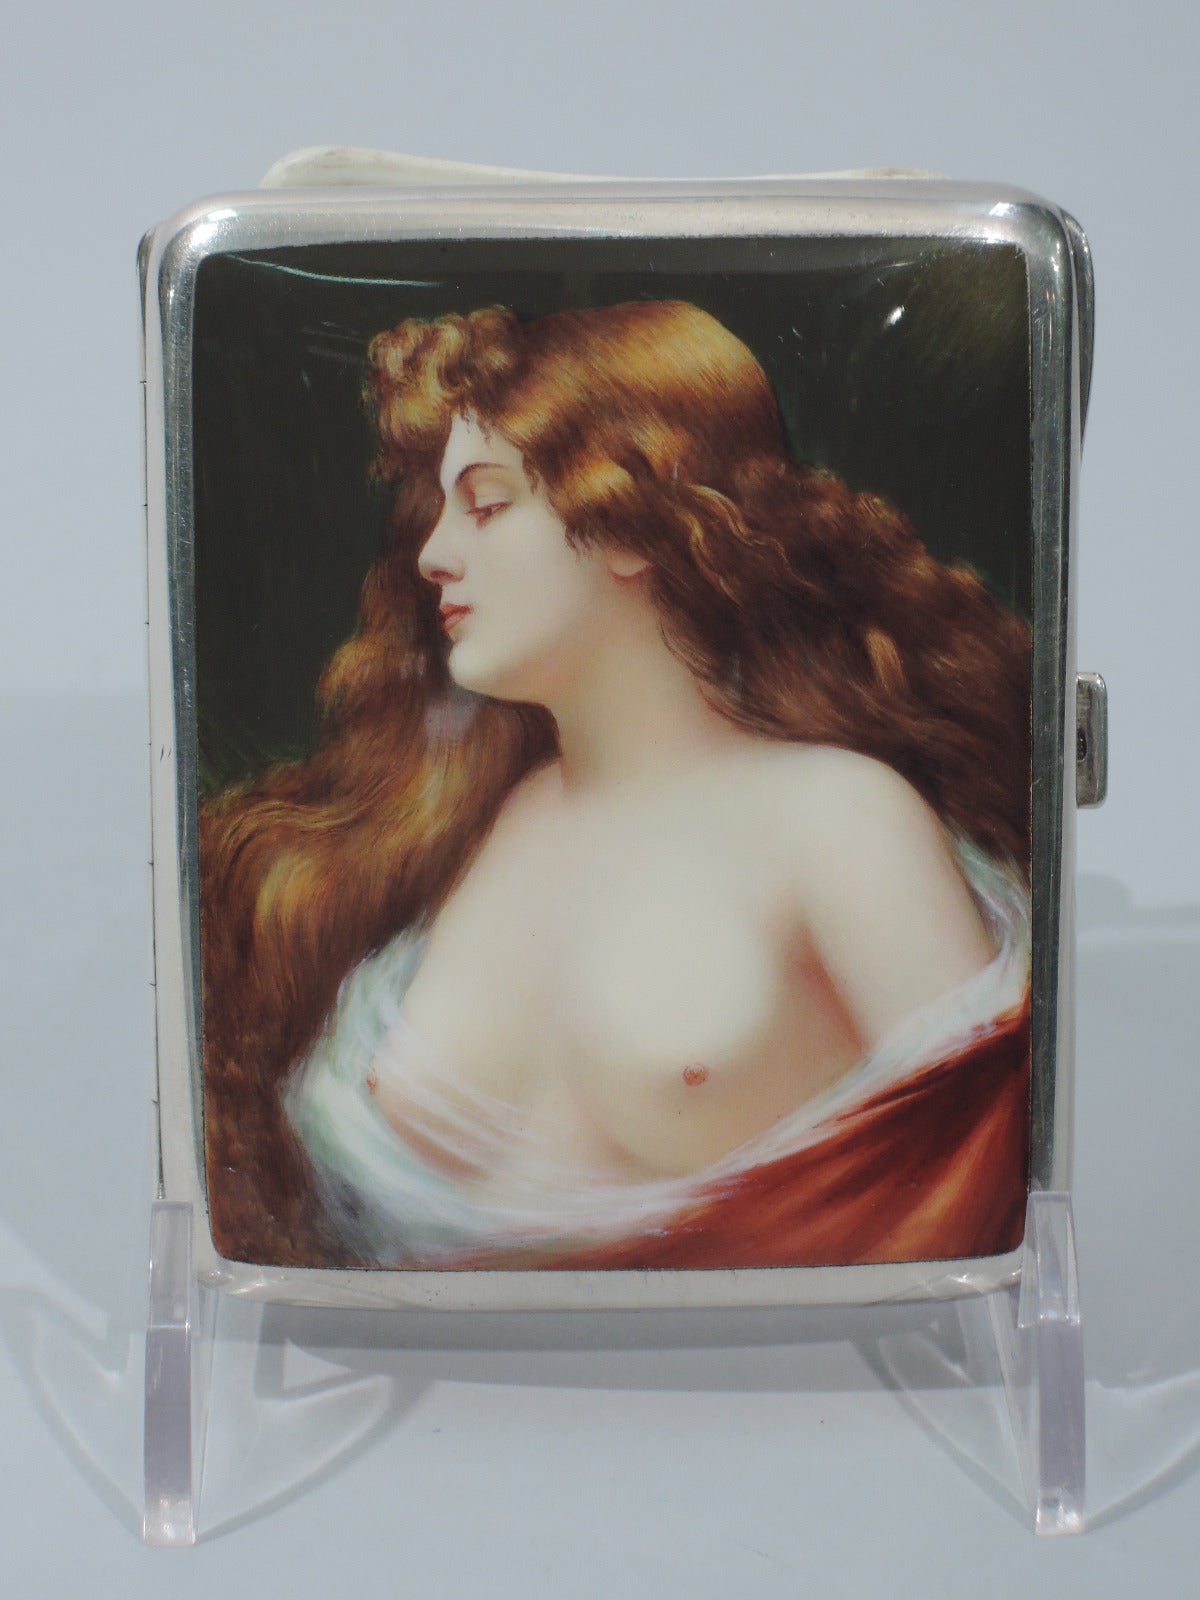 European sterling silver and enamel cigarette case. Imported to Birmingham in 1905 by Steinhart & Co. Rectangular and hinged. On cover is bust of long-tressed temptress with rose-tinted flesh swathed in red robe. Full frontal. For PG-13 version, see